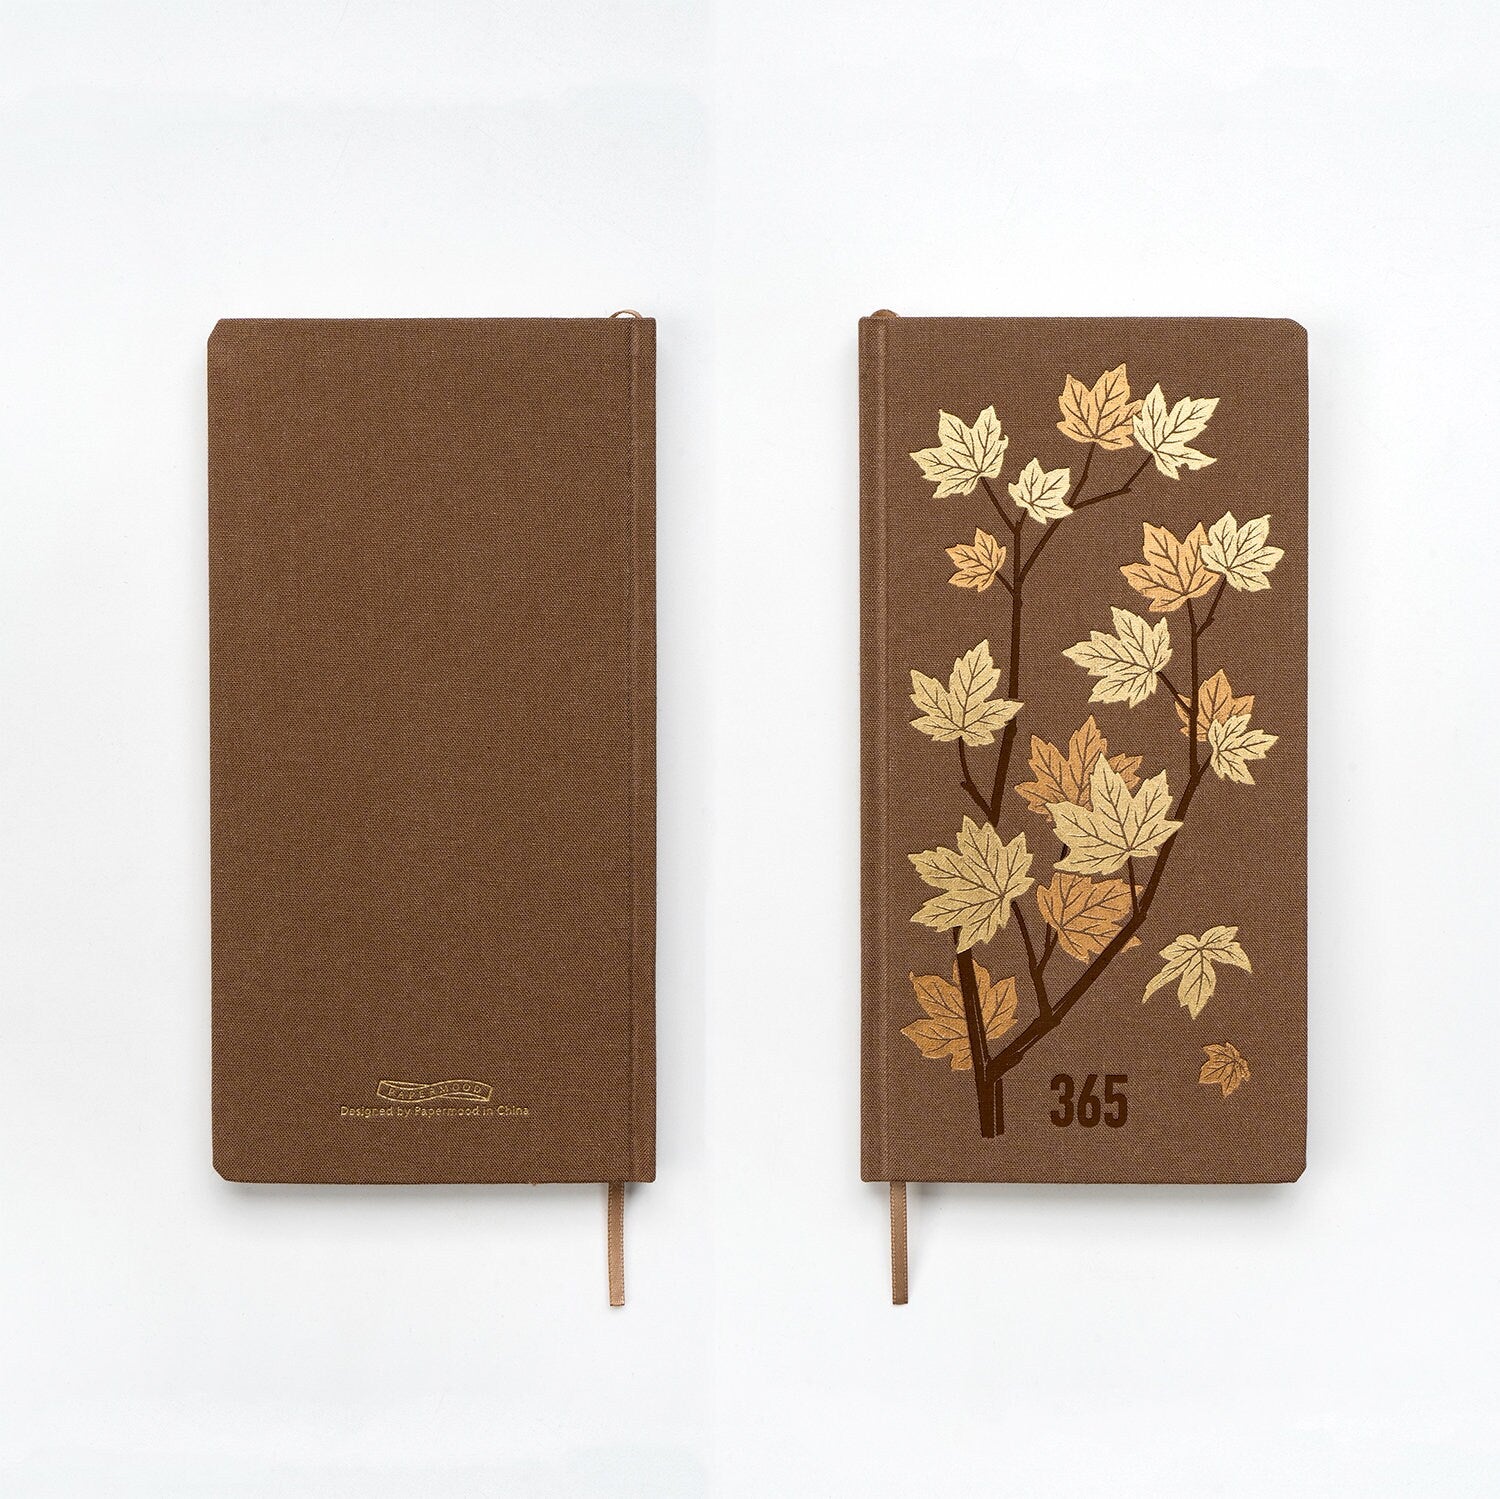 Late Maple Hardcover Journal Cute Floral Self-filling Planner Retro Travel Notebook Portable Floral Book for Scrapbooking Autumn's Gift